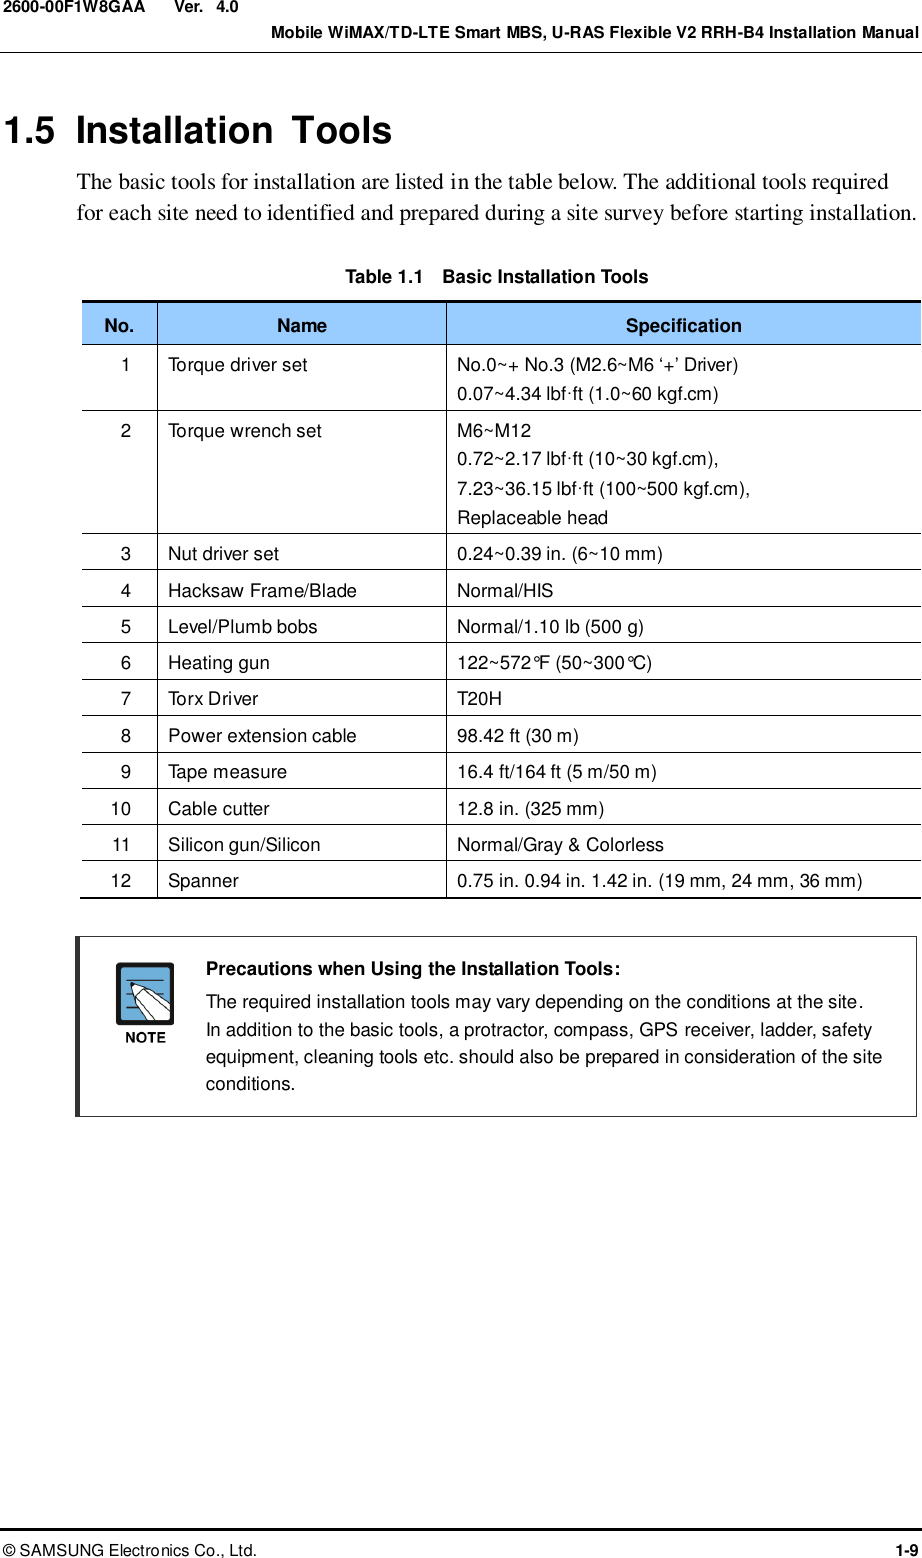  Ver.    Mobile WiMAX/TD-LTE Smart MBS, U-RAS Flexible V2 RRH-B4 Installation Manual ©  SAMSUNG Electronics Co., Ltd.  1-9 2600-00F1W8GAA 4.0 1.5  Installation  Tools The basic tools for installation are listed in the table below. The additional tools required for each site need to identified and prepared during a site survey before starting installation.  Table 1.1  Basic Installation Tools No. Name Specification 1 Torque driver set No.0~+ No.3 (M2.6~M6 ‘+’ Driver) 0.07~4.34 lbf·ft (1.0~60 kgf.cm) 2 Torque wrench set M6~M12 0.72~2.17 lbf·ft (10~30 kgf.cm),   7.23~36.15 lbf·ft (100~500 kgf.cm),   Replaceable head 3 Nut driver set 0.24~0.39 in. (6~10 mm) 4 Hacksaw Frame/Blade Normal/HIS 5 Level/Plumb bobs Normal/1.10 lb (500 g) 6 Heating gun 122~572°F (50~300°C) 7 Torx Driver T20H 8 Power extension cable 98.42 ft (30 m) 9 Tape measure 16.4 ft/164 ft (5 m/50 m) 10 Cable cutter 12.8 in. (325 mm) 11 Silicon gun/Silicon Normal/Gray &amp; Colorless   12 Spanner 0.75 in. 0.94 in. 1.42 in. (19 mm, 24 mm, 36 mm)    Precautions when Using the Installation Tools:   The required installation tools may vary depending on the conditions at the site.   In addition to the basic tools, a protractor, compass, GPS receiver, ladder, safety equipment, cleaning tools etc. should also be prepared in consideration of the site conditions.  